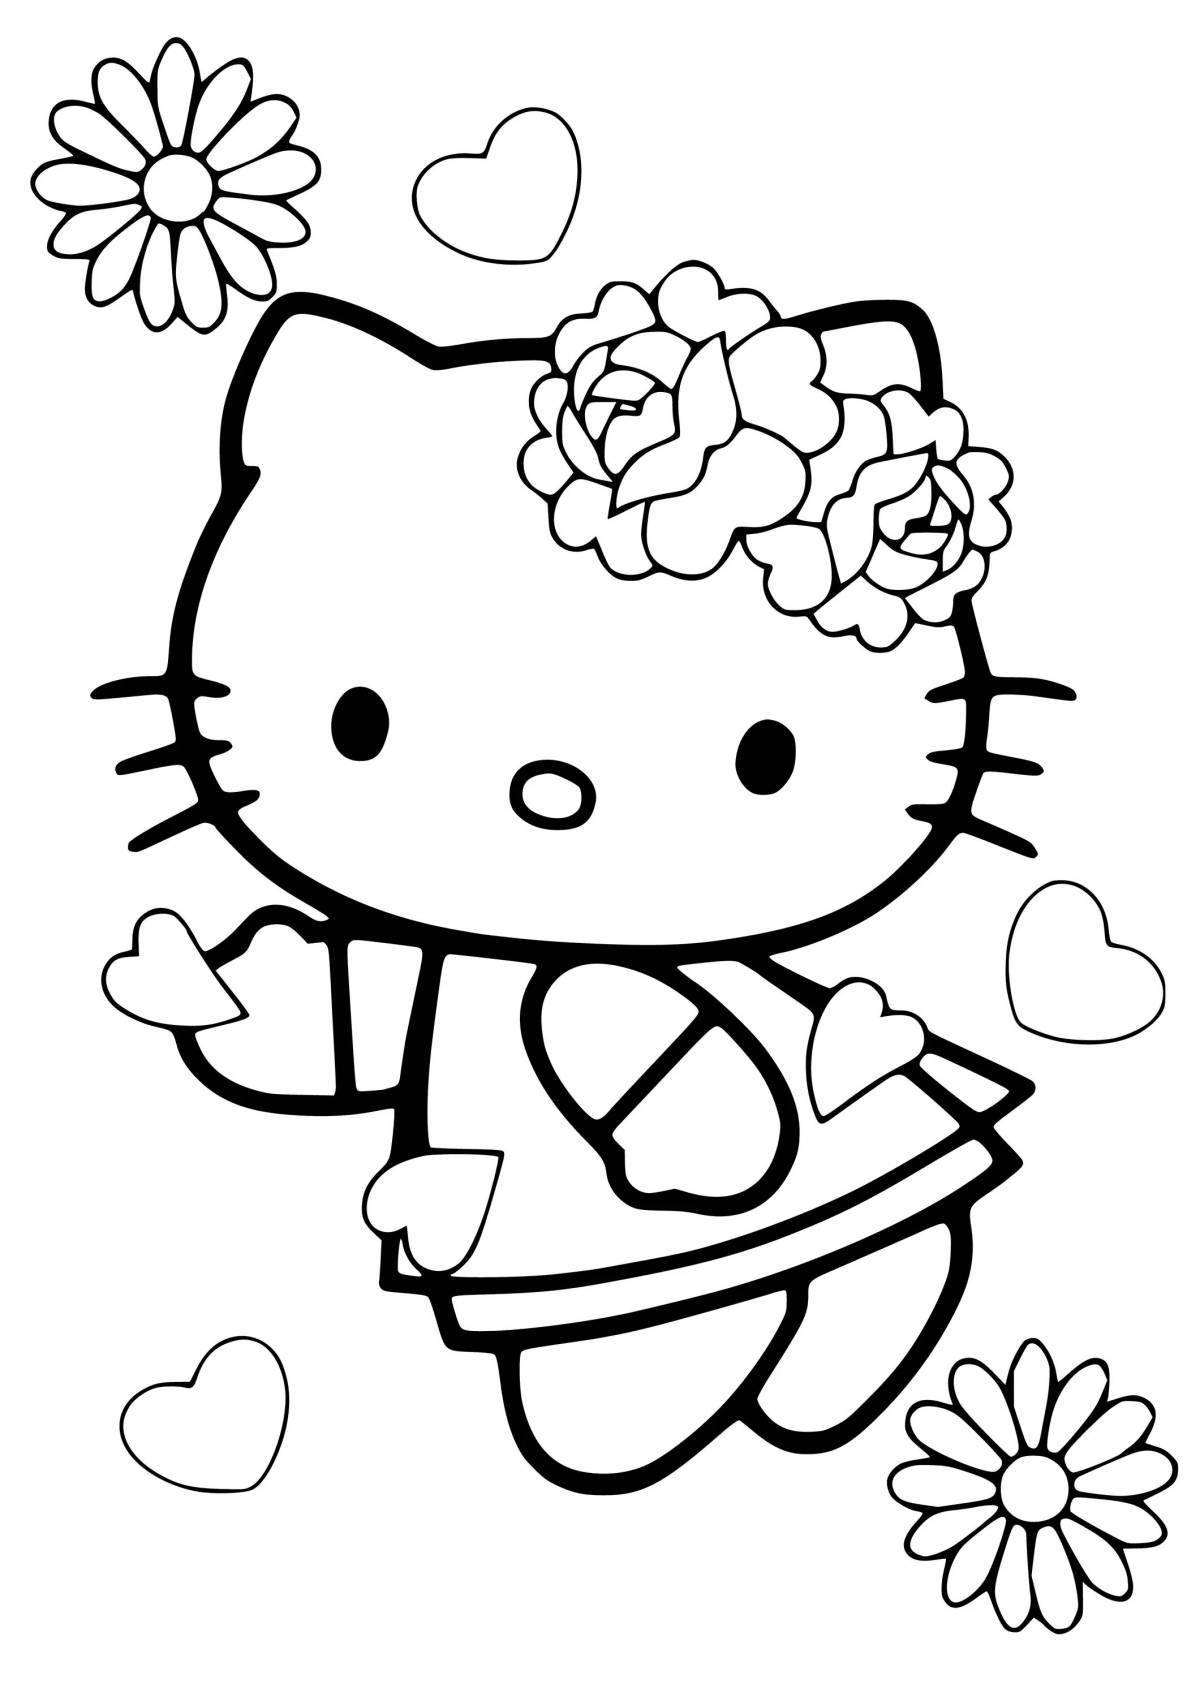 Colorful aster kitty coloring page